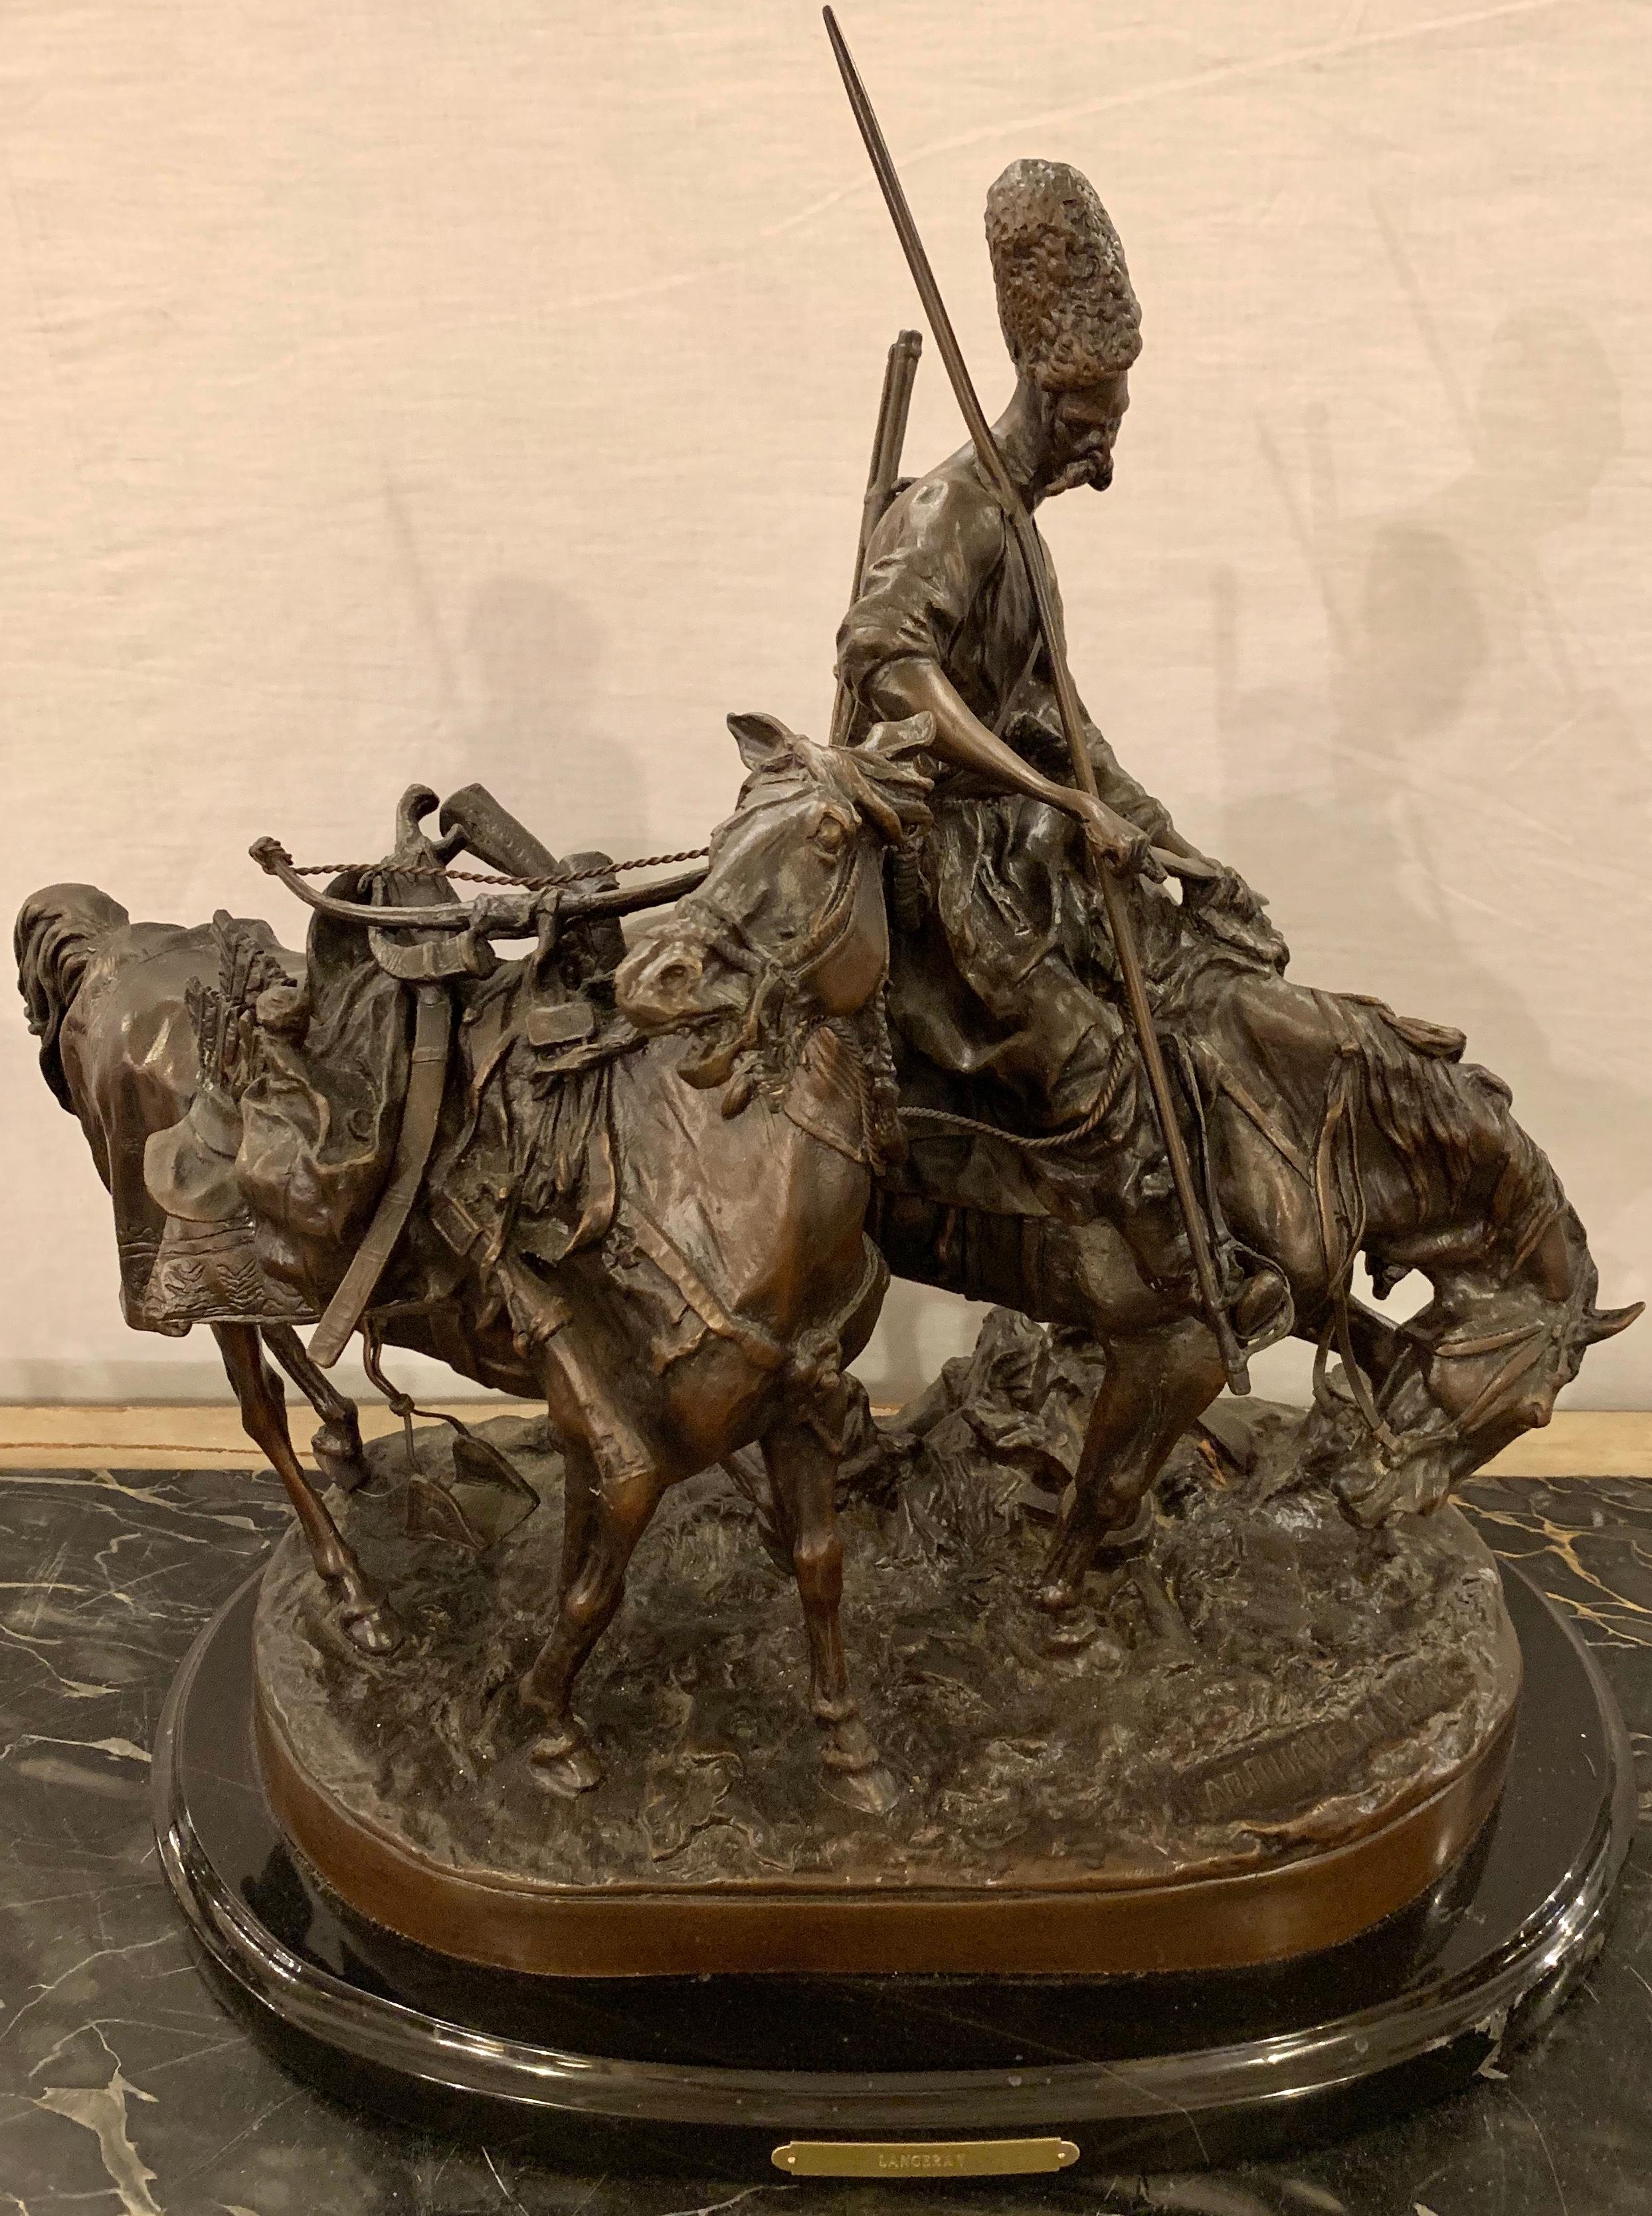 After Eugene Alexandrovich Lanceray (Russian, 1875-1946), Zaporozhsky Kazak on Horseback After a Battle with a Turkish Trophy Horse, patinated bronze sculpture, bears signature (in Cyrillic) lower right, overall (with marble base): 18.5